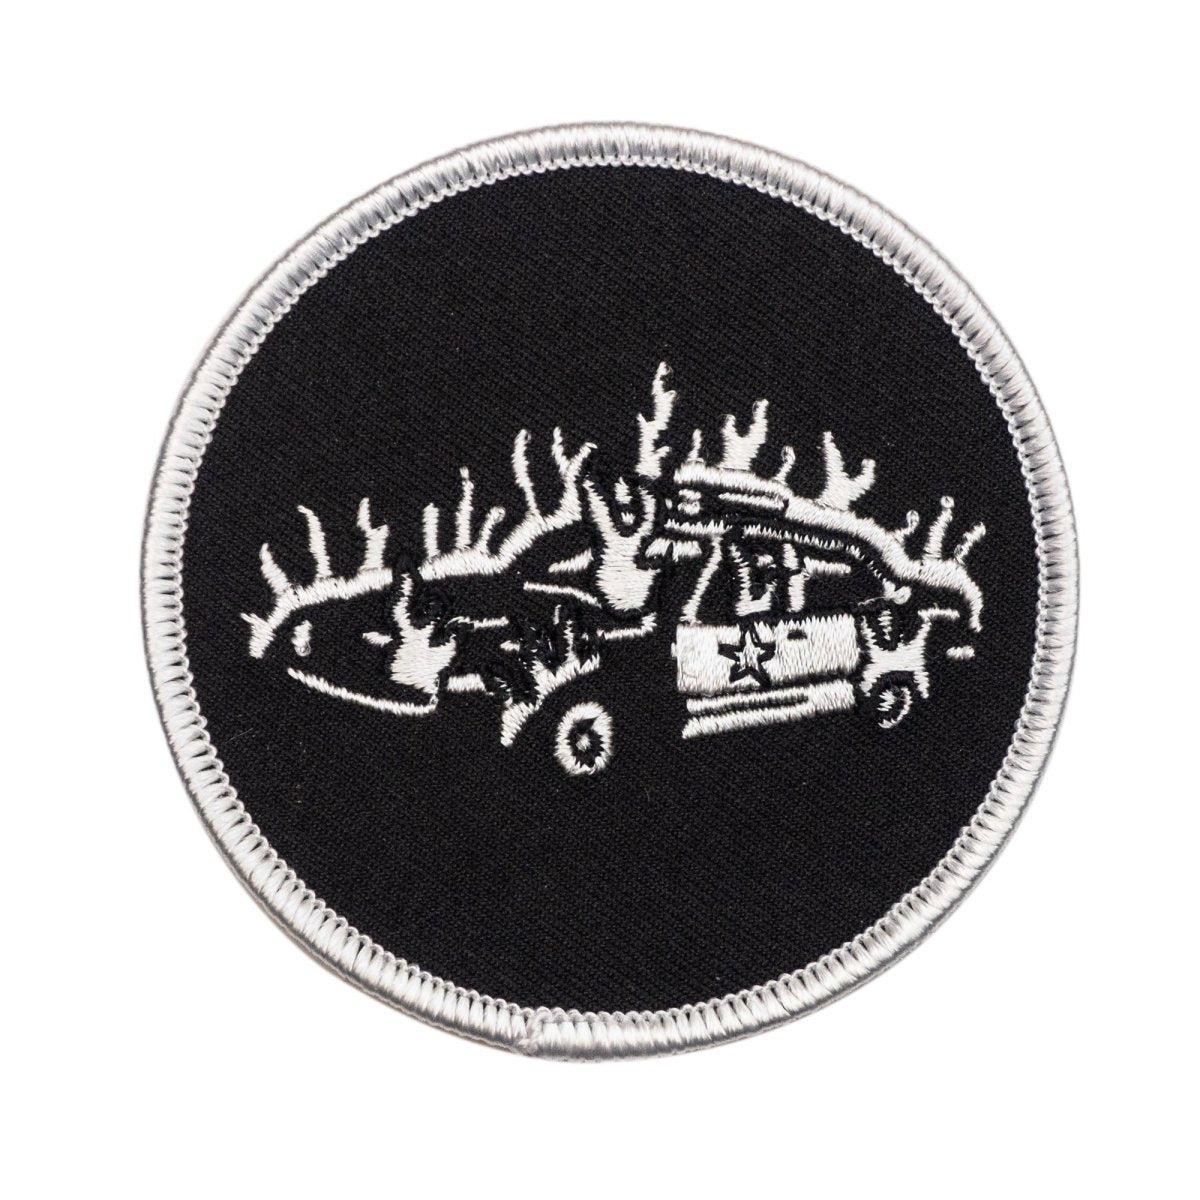 Burning Cop Car Patch - Patch - Pretty Bad Co.